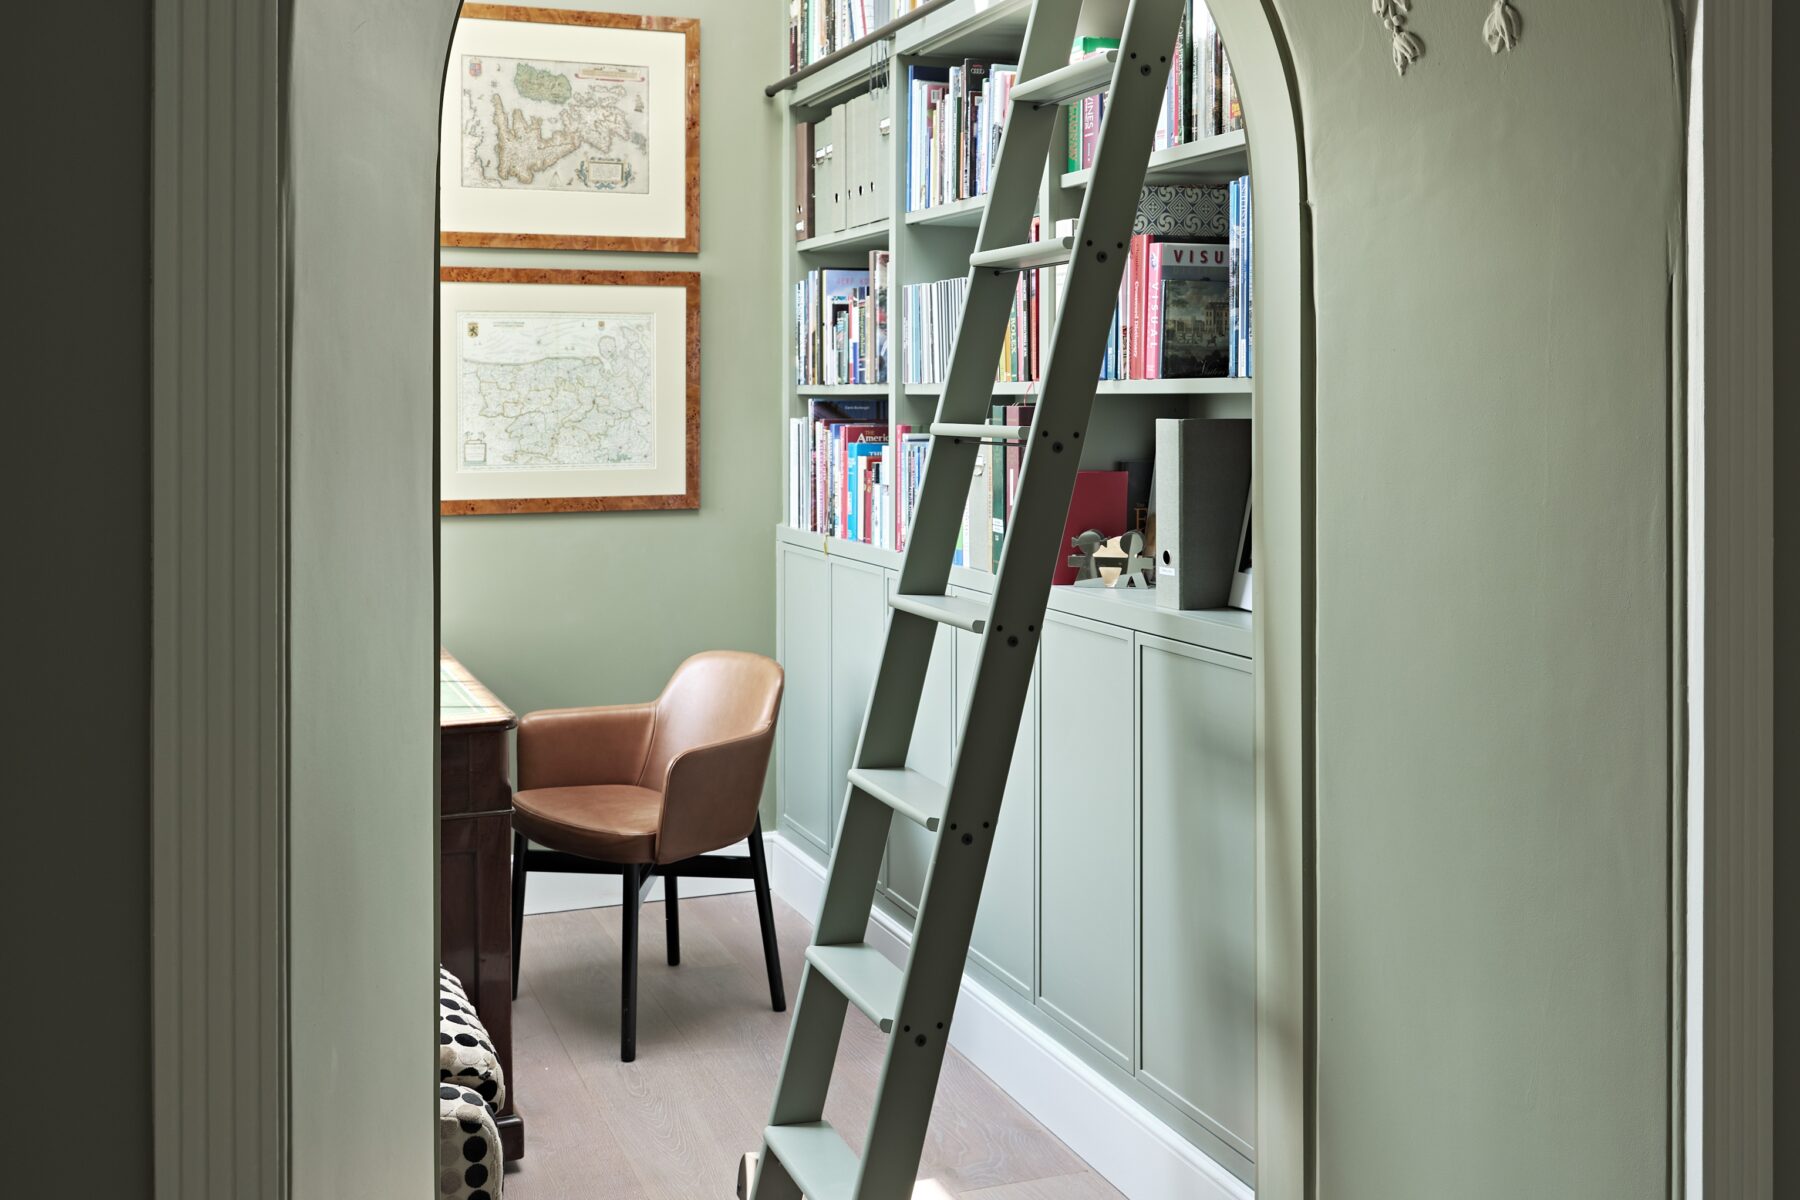 Bath Bespoke_study space with library ladder